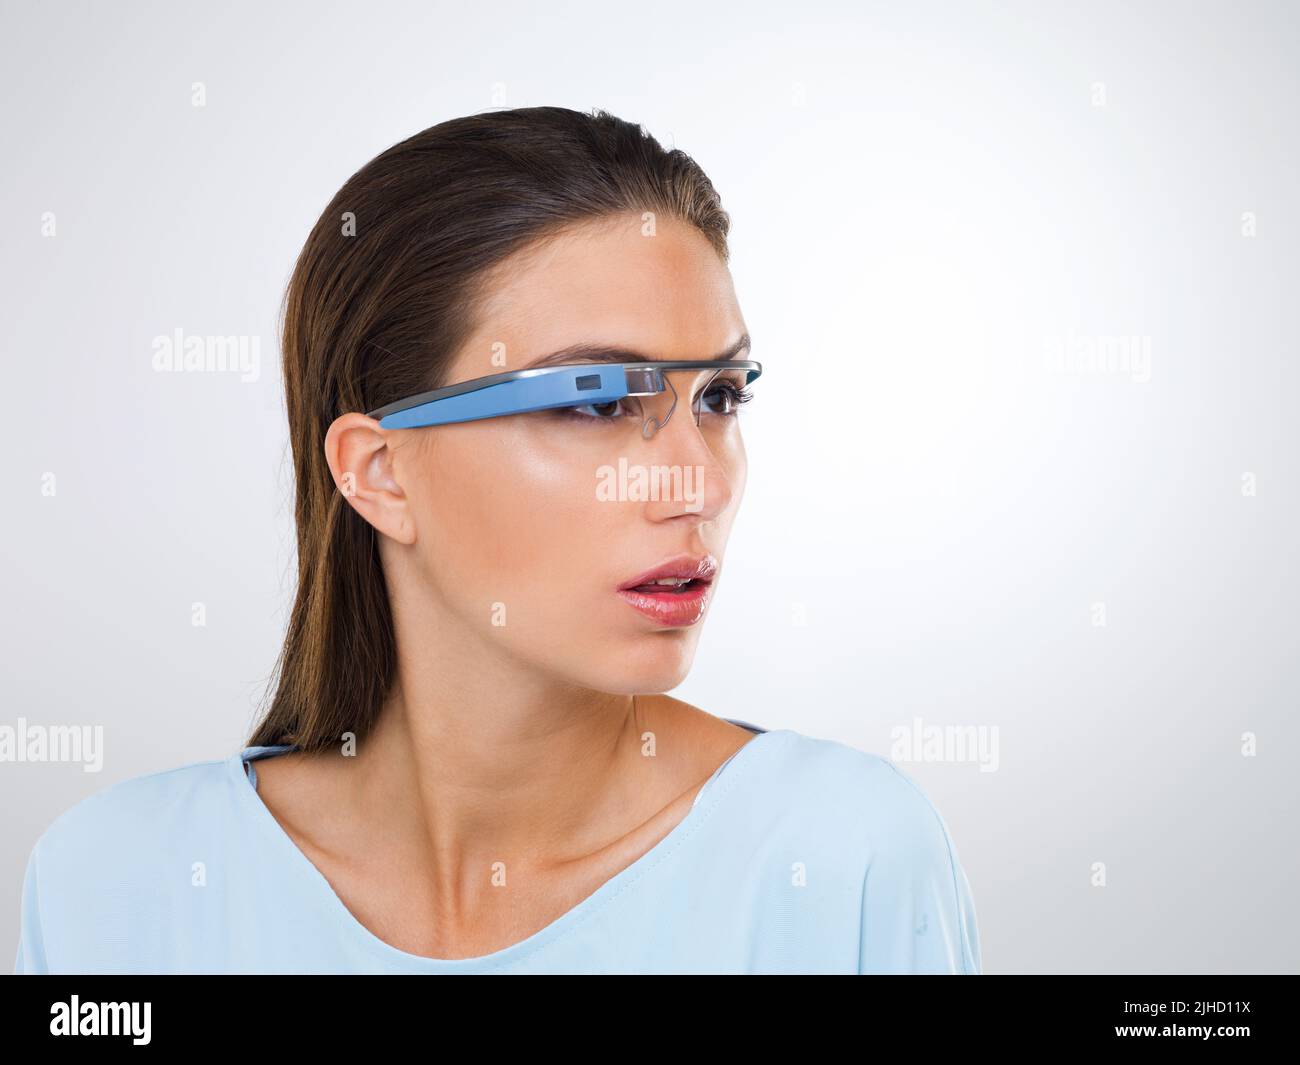 an attractive young woman wearing glasses with internet access.The commercial product(s) or designs displayed in this image represent simulations of a Stock Photo